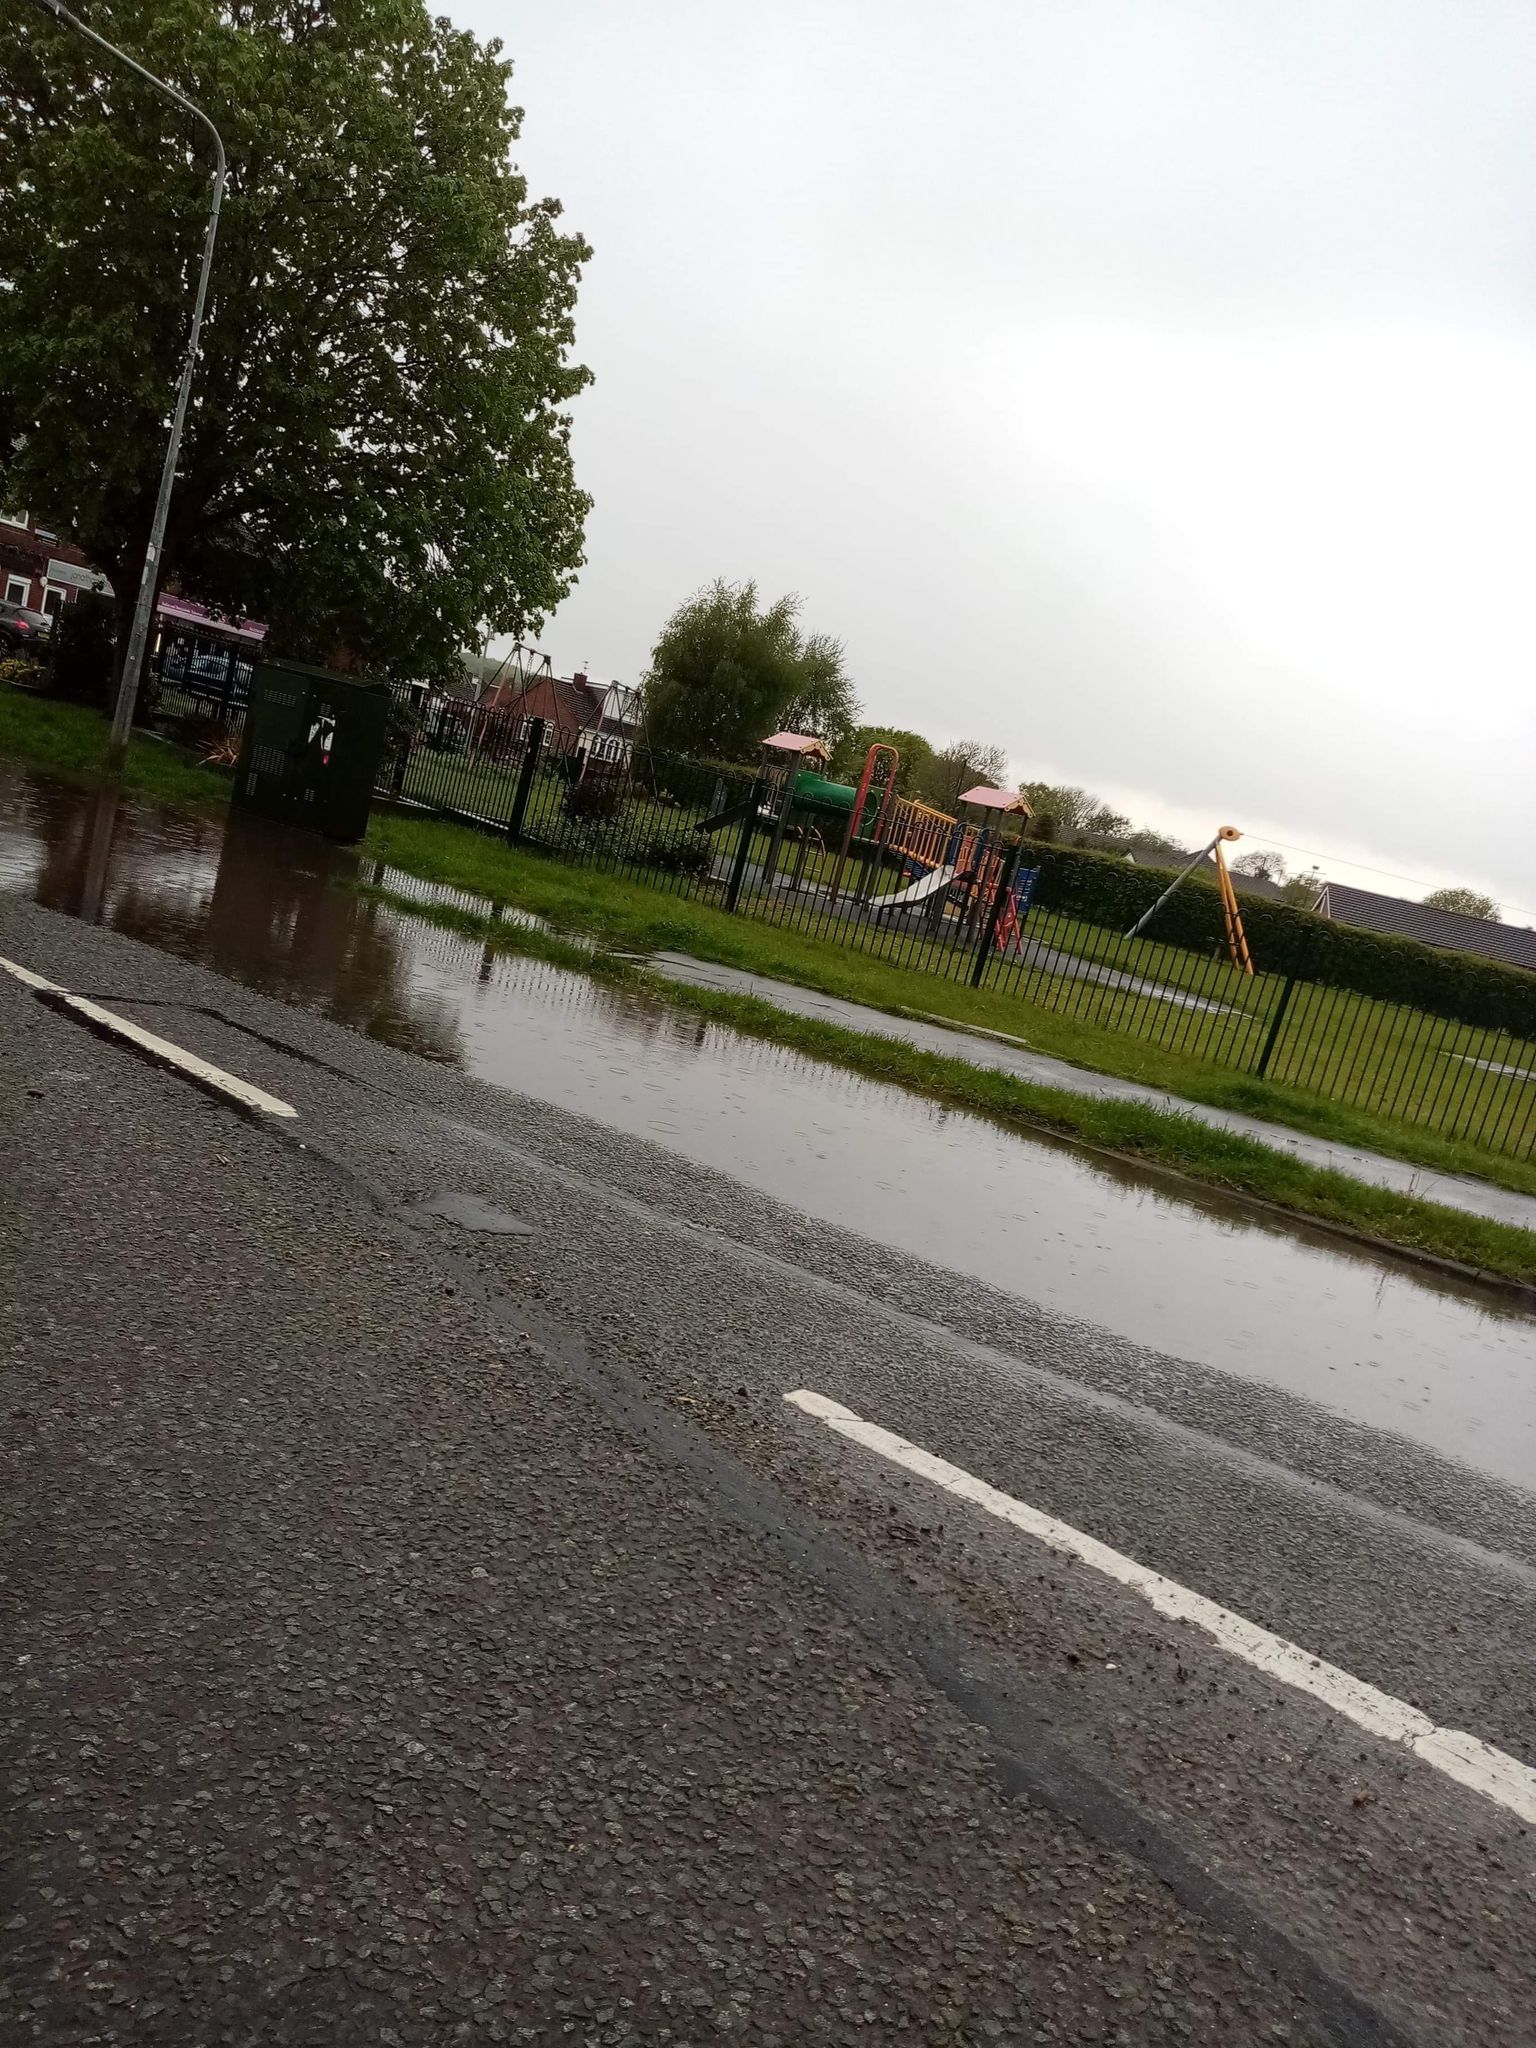 Flooding in Hawarden. Image from Cllr Helen Brown